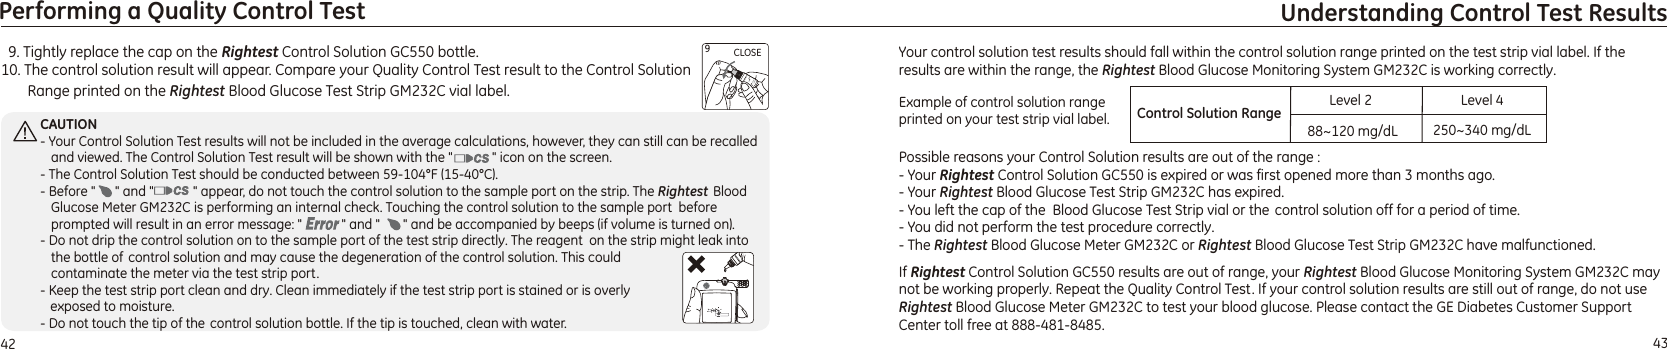   9. Tightly replace the cap on the   bottle.10. The control solution result will appear. Compare your Quality Control Test result to the Control Solution Range printed on the Rightest Blood Glucose Test Strip   vial label.Rightest Control Solution GC550GM232CIf Rightest Control Solution GC550 results are out of range, your Rightest Blood Glucose Monitoring System GM232C may not be working properly. Repeat the Quality Control Test. If your control solution results are still out of range, do not use      Rightest Blood Glucose Meter GM232C to test your blood glucose. Please contact the GE Diabetes Customer Support Center  .toll free at 888-481-848543Understanding Control Test Results42Performing a Quality Control TestCLOSE9CAUTION- Your Control Solution Test results will not be included in the average calculations, however, they can still can be recalled and viewed. The Control Solution Test result will be shown with the &quot;            &quot; icon on the screen.- The Control Solution Test should be conducted between 59-104°F (15-40°C). - Before &quot;      &quot; and &quot;            &quot; appear, do not touch the control solution to the sample port on the strip. The Rightest  Blood Glucose Meter  is performing an internal check. Touching the control solution to the sample port  before prompted will result in an error message: &quot;            &quot; and &quot;       &quot;  .- Do not drip the control solution on to the sample port of the test strip directly. The reagent  on the strip might leak into  the bottle of control solution and may cause the degeneration of the control solution. This could contaminate the meter via the test strip port.- Keep the test strip port clean and dry. Clean immediately if the test strip port is stained or is overly    exposed to moisture. - Do not touch the tip of the control solution bottle. If the tip is touched, clean with water.GM232C and be accompanied by beeps (if volume is turned on)Your control solution test results should fall within the control solution range printed on the test strip vial label. If the results are within the range, the Rightest Blood Glucose Monitoring System GM232C is working correctly.Possible reasons your Control Solution results are out of the range :- Your   is expired or was first opened more than 3 months ago.- Your Rightest Blood Glucose Test Strip   has expired.    - You left the cap of the  Blood Glucose Test Strip vial or the  control solution off for a period of time.- You did not perform the test procedure correctly. - The  Blood Glucose Meter  or  Blood Glucose Test Strip  have malfunctioned. Rightest Control Solution GC550GM232C Rightest GM232C  Rightest GM232C Example of control solution range printed on your test strip vial label. Control Solution Range88~120 mg/dL 250~340 mg/dLLevel 2 Level 4